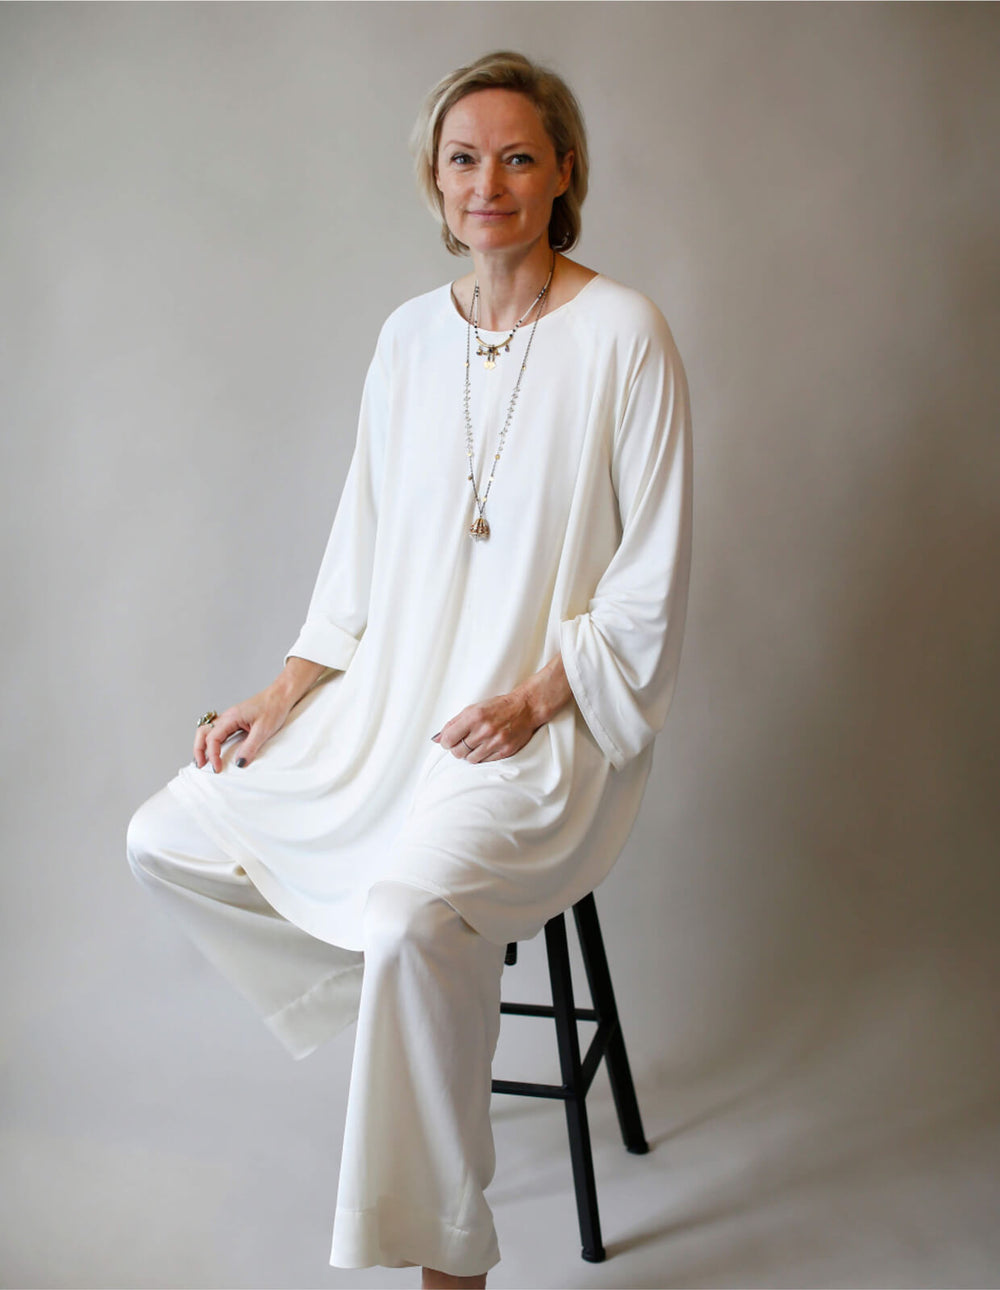 Woman wearing Flared Tunic sewing pattern from The Maker's Atelier on The Fold Line. A tunic pattern made in cotton terry and loopback, microfleece, viscose jersey and boiled wool fabrics, featuring a round neck, oversized fit, A-line shape, and long slee